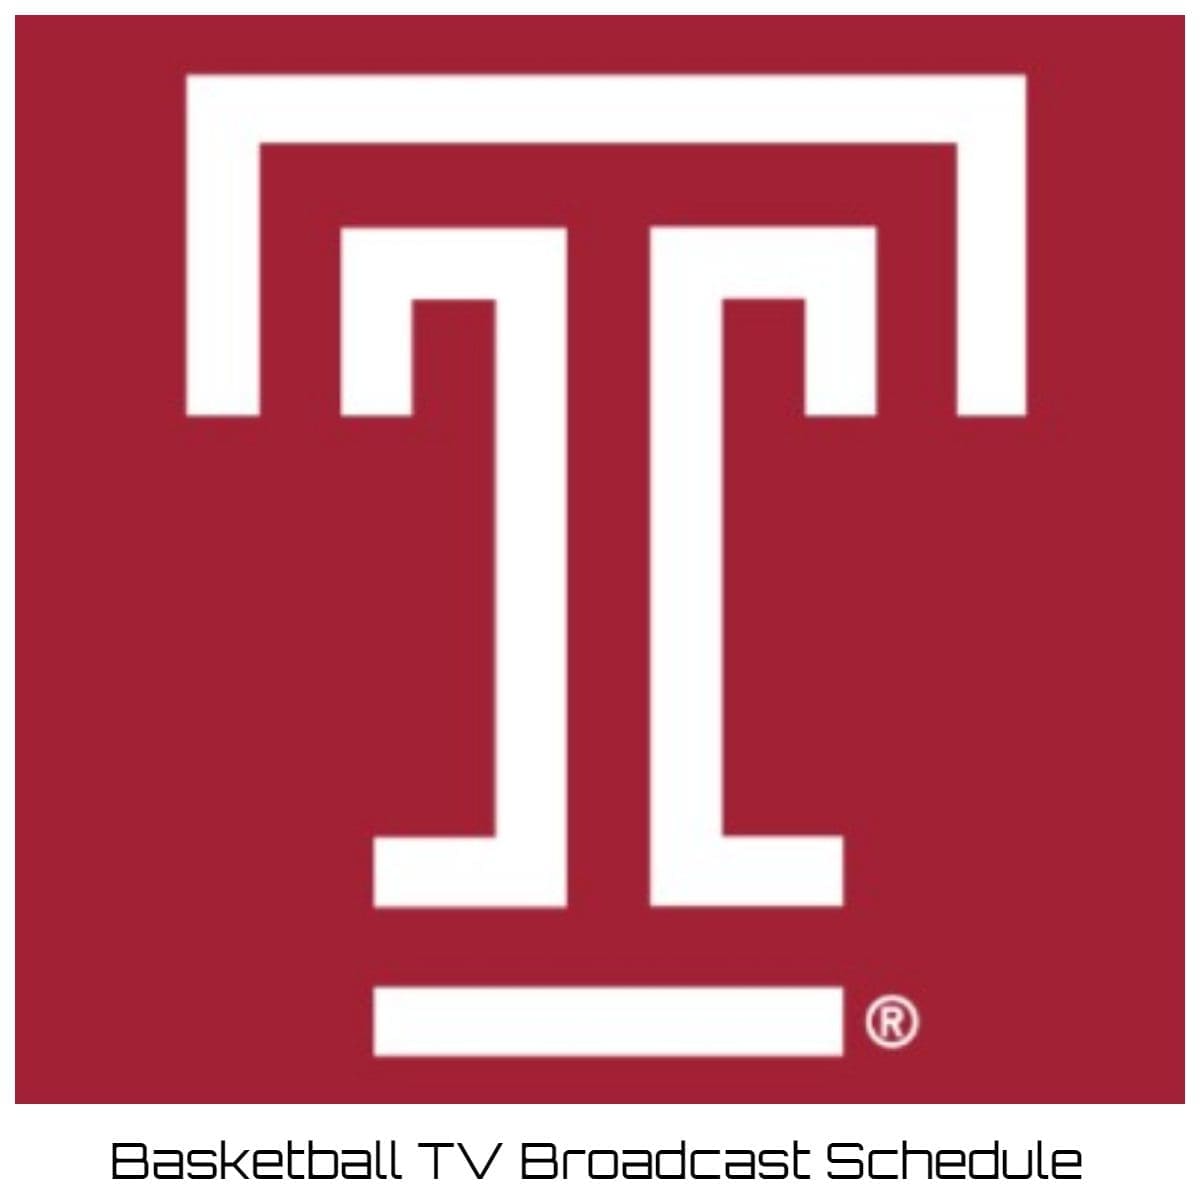 Temple Owls Basketball TV Broadcast Schedule